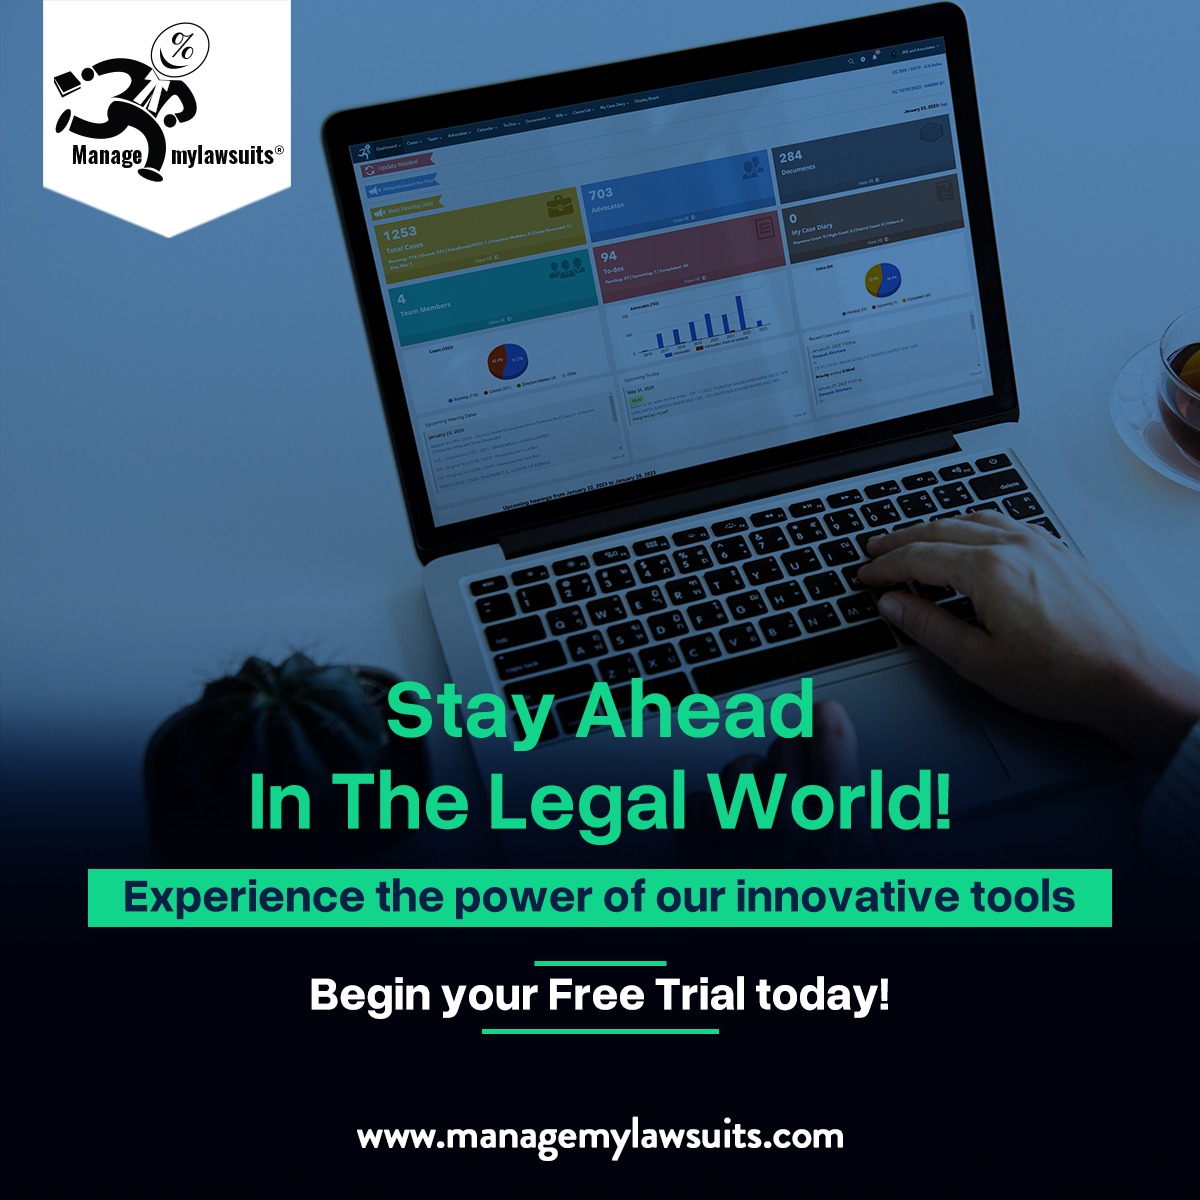 Stay ahead in the legal world with our cutting-edge tools designed to streamline your practice and boost productivity. Experience the power of innovation as you navigate cases with ease and efficiency.
Begin your Free Trial today. Call now.

#software #managemylawsuits #mml